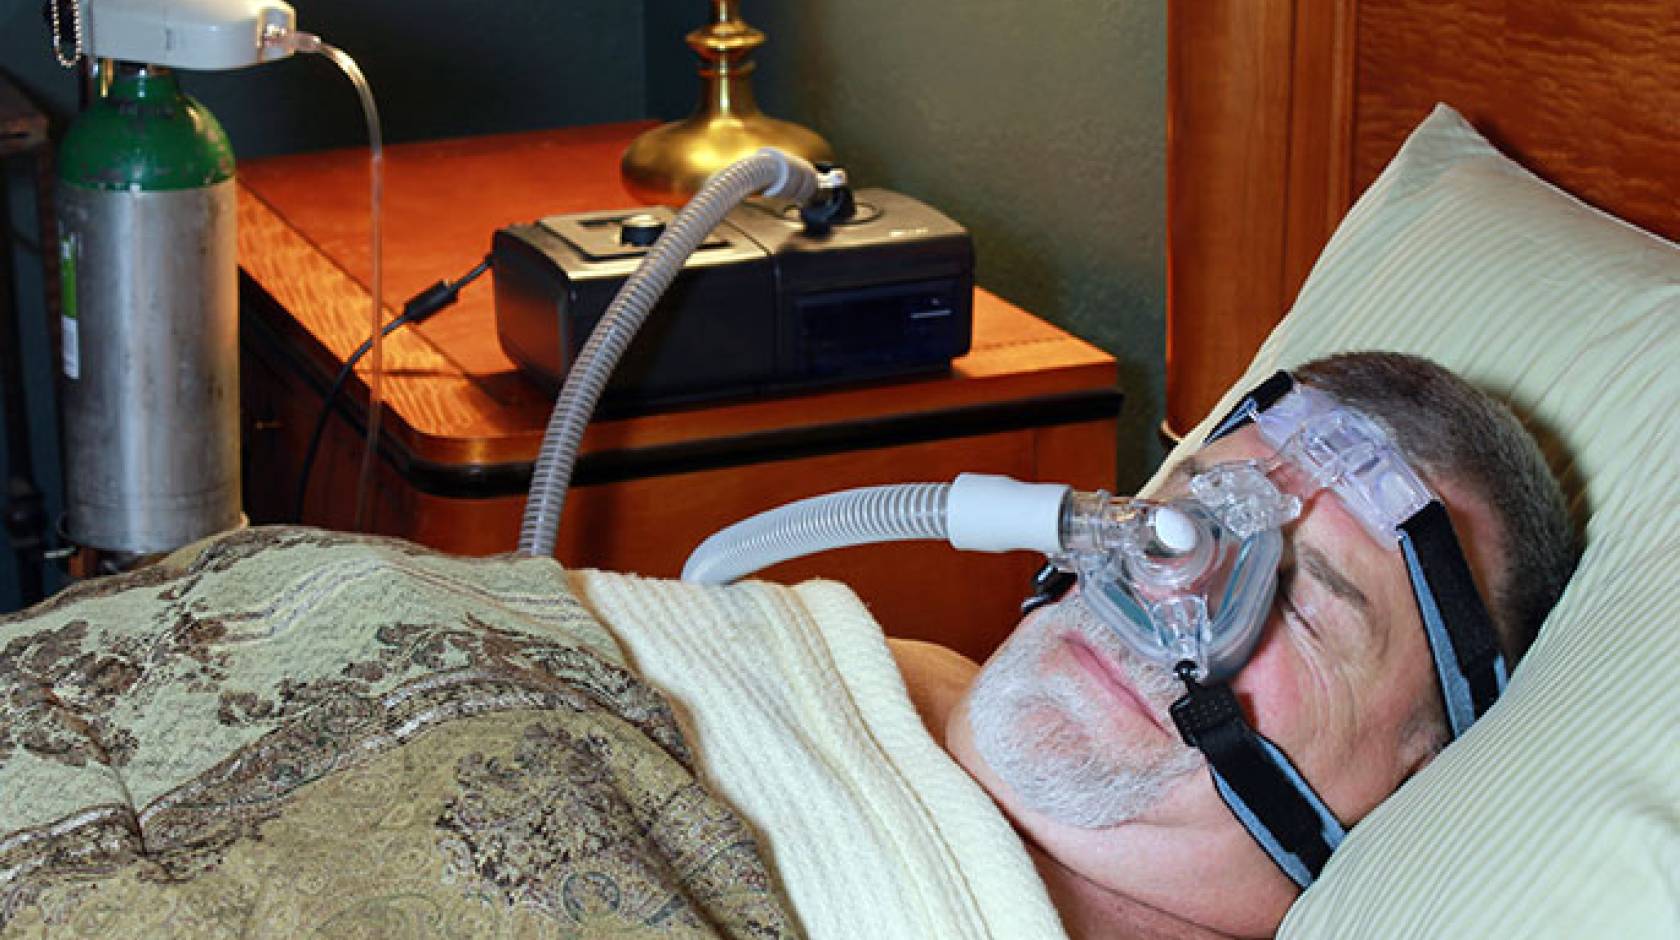 man with CPAP machine